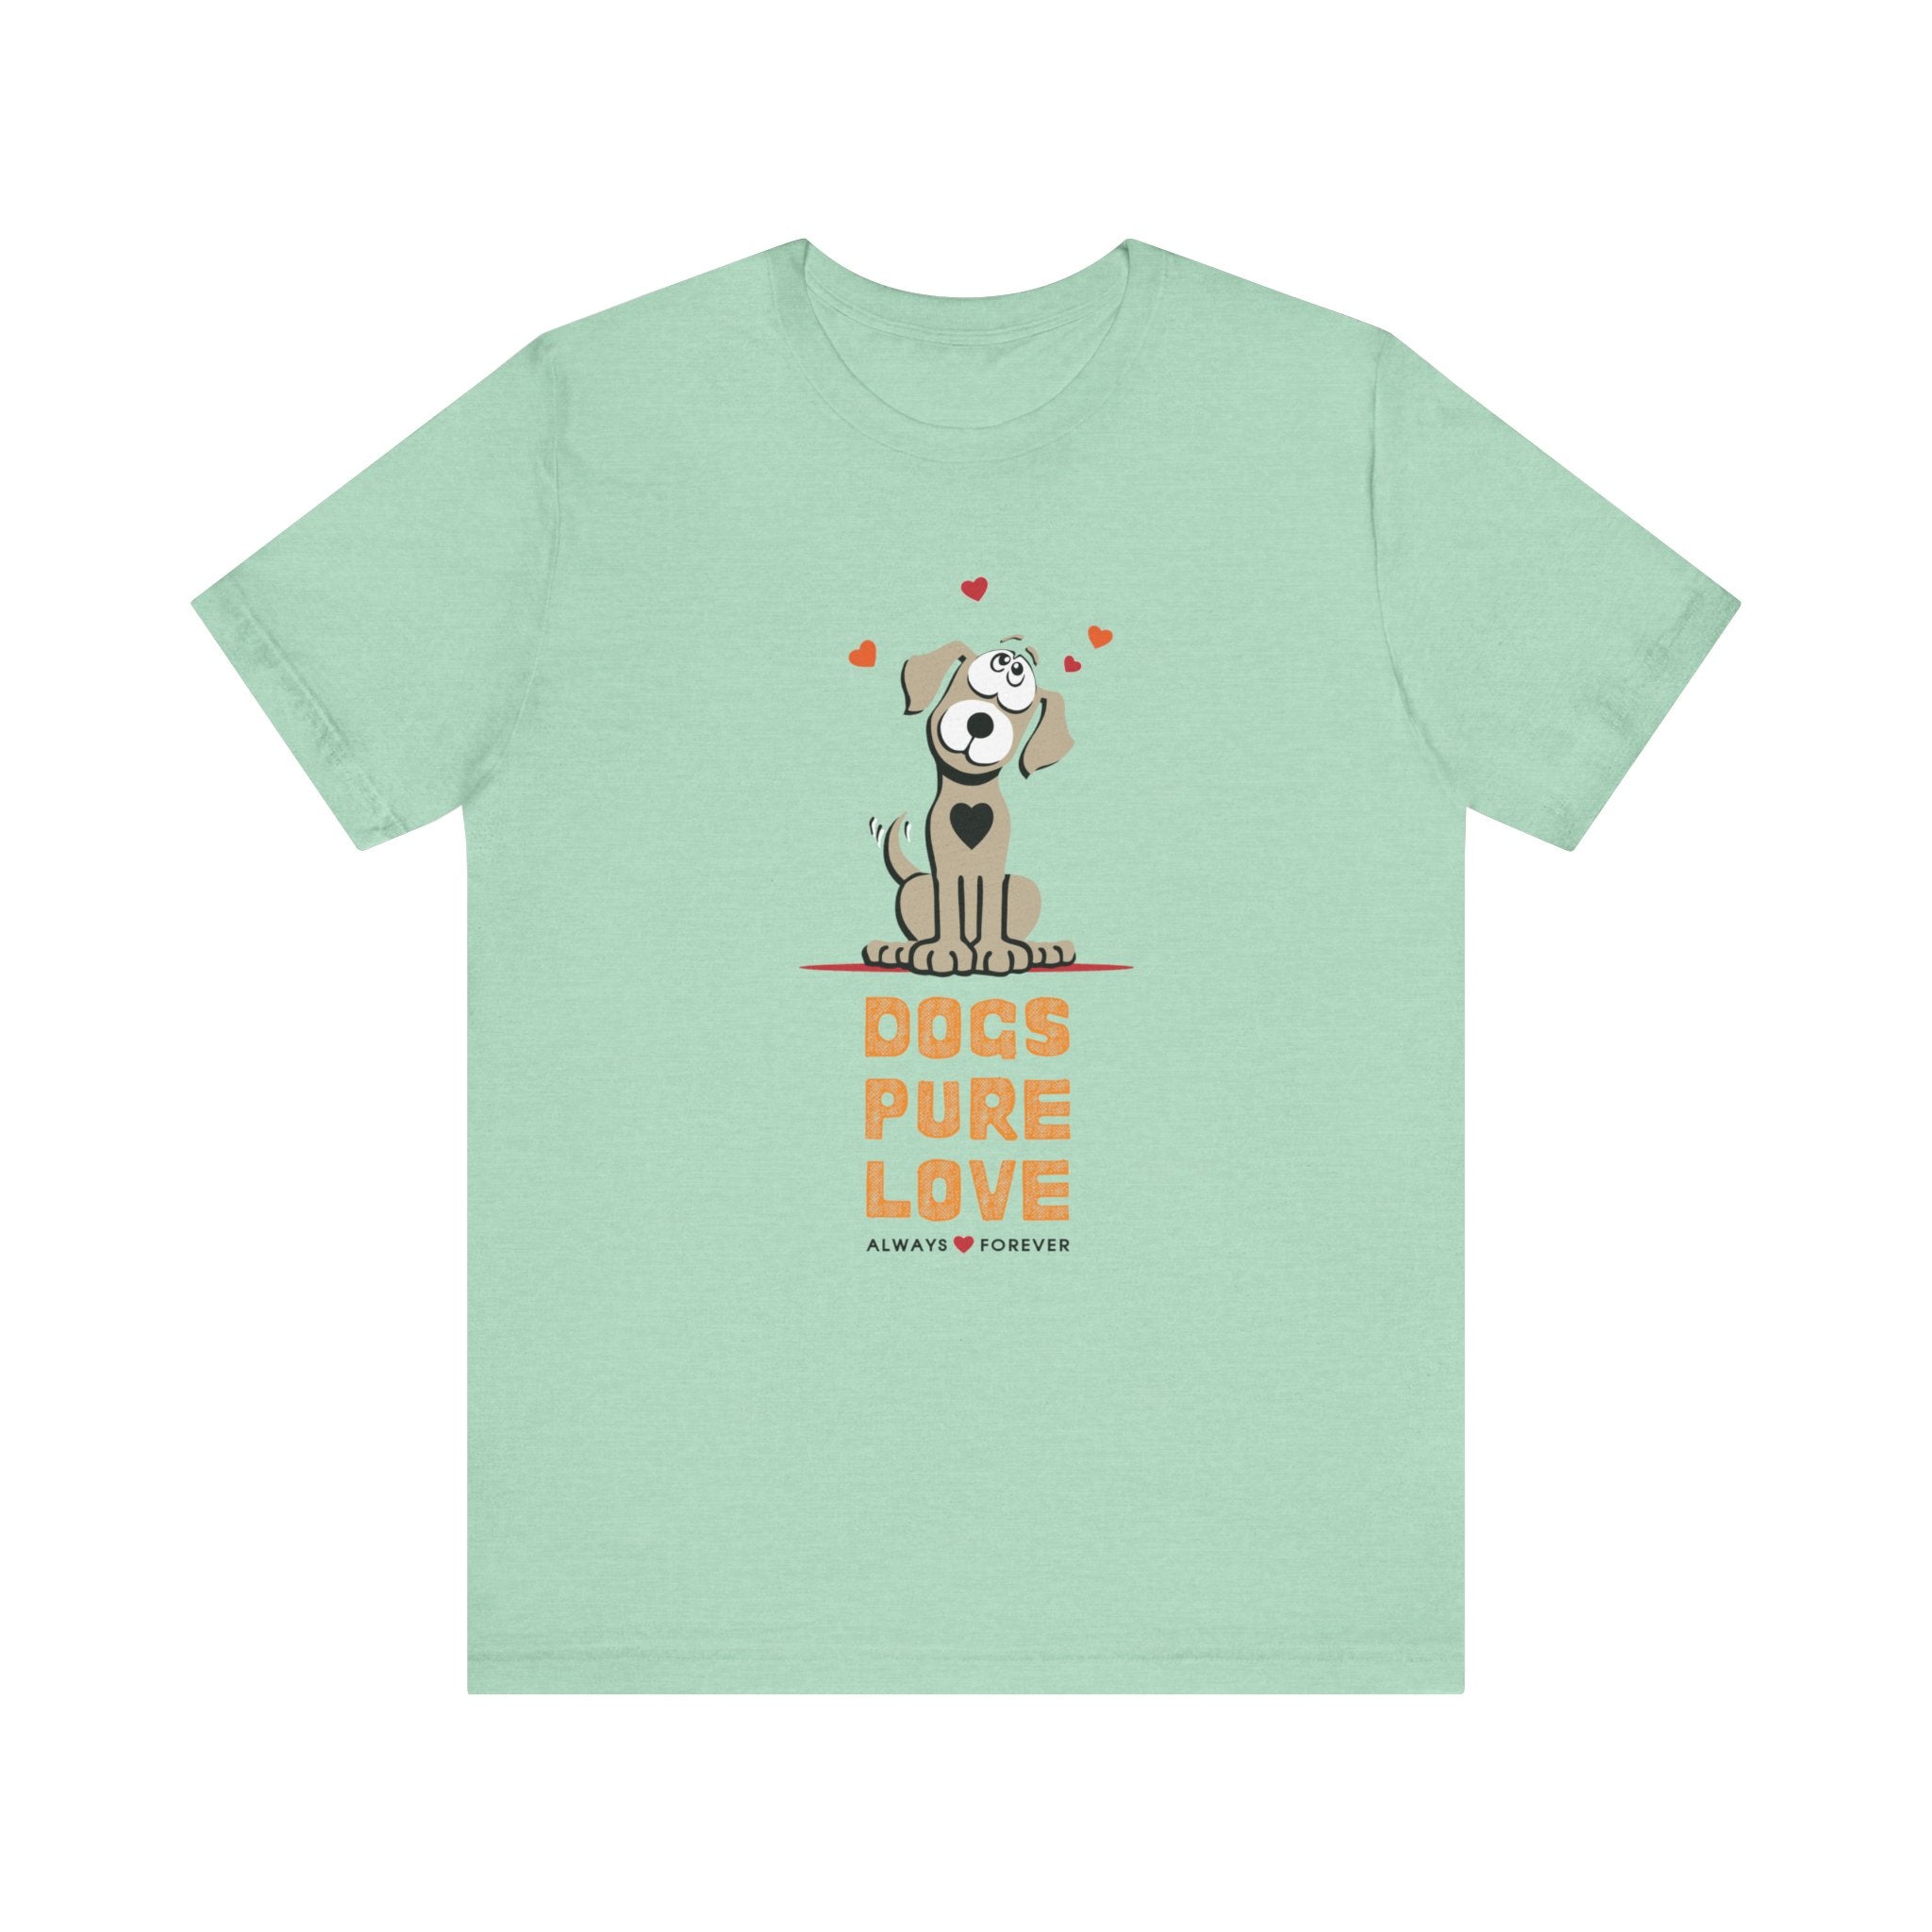 A heather mint unisex tee spotlights the Dogs Pure Love logo, against a white backdrop.